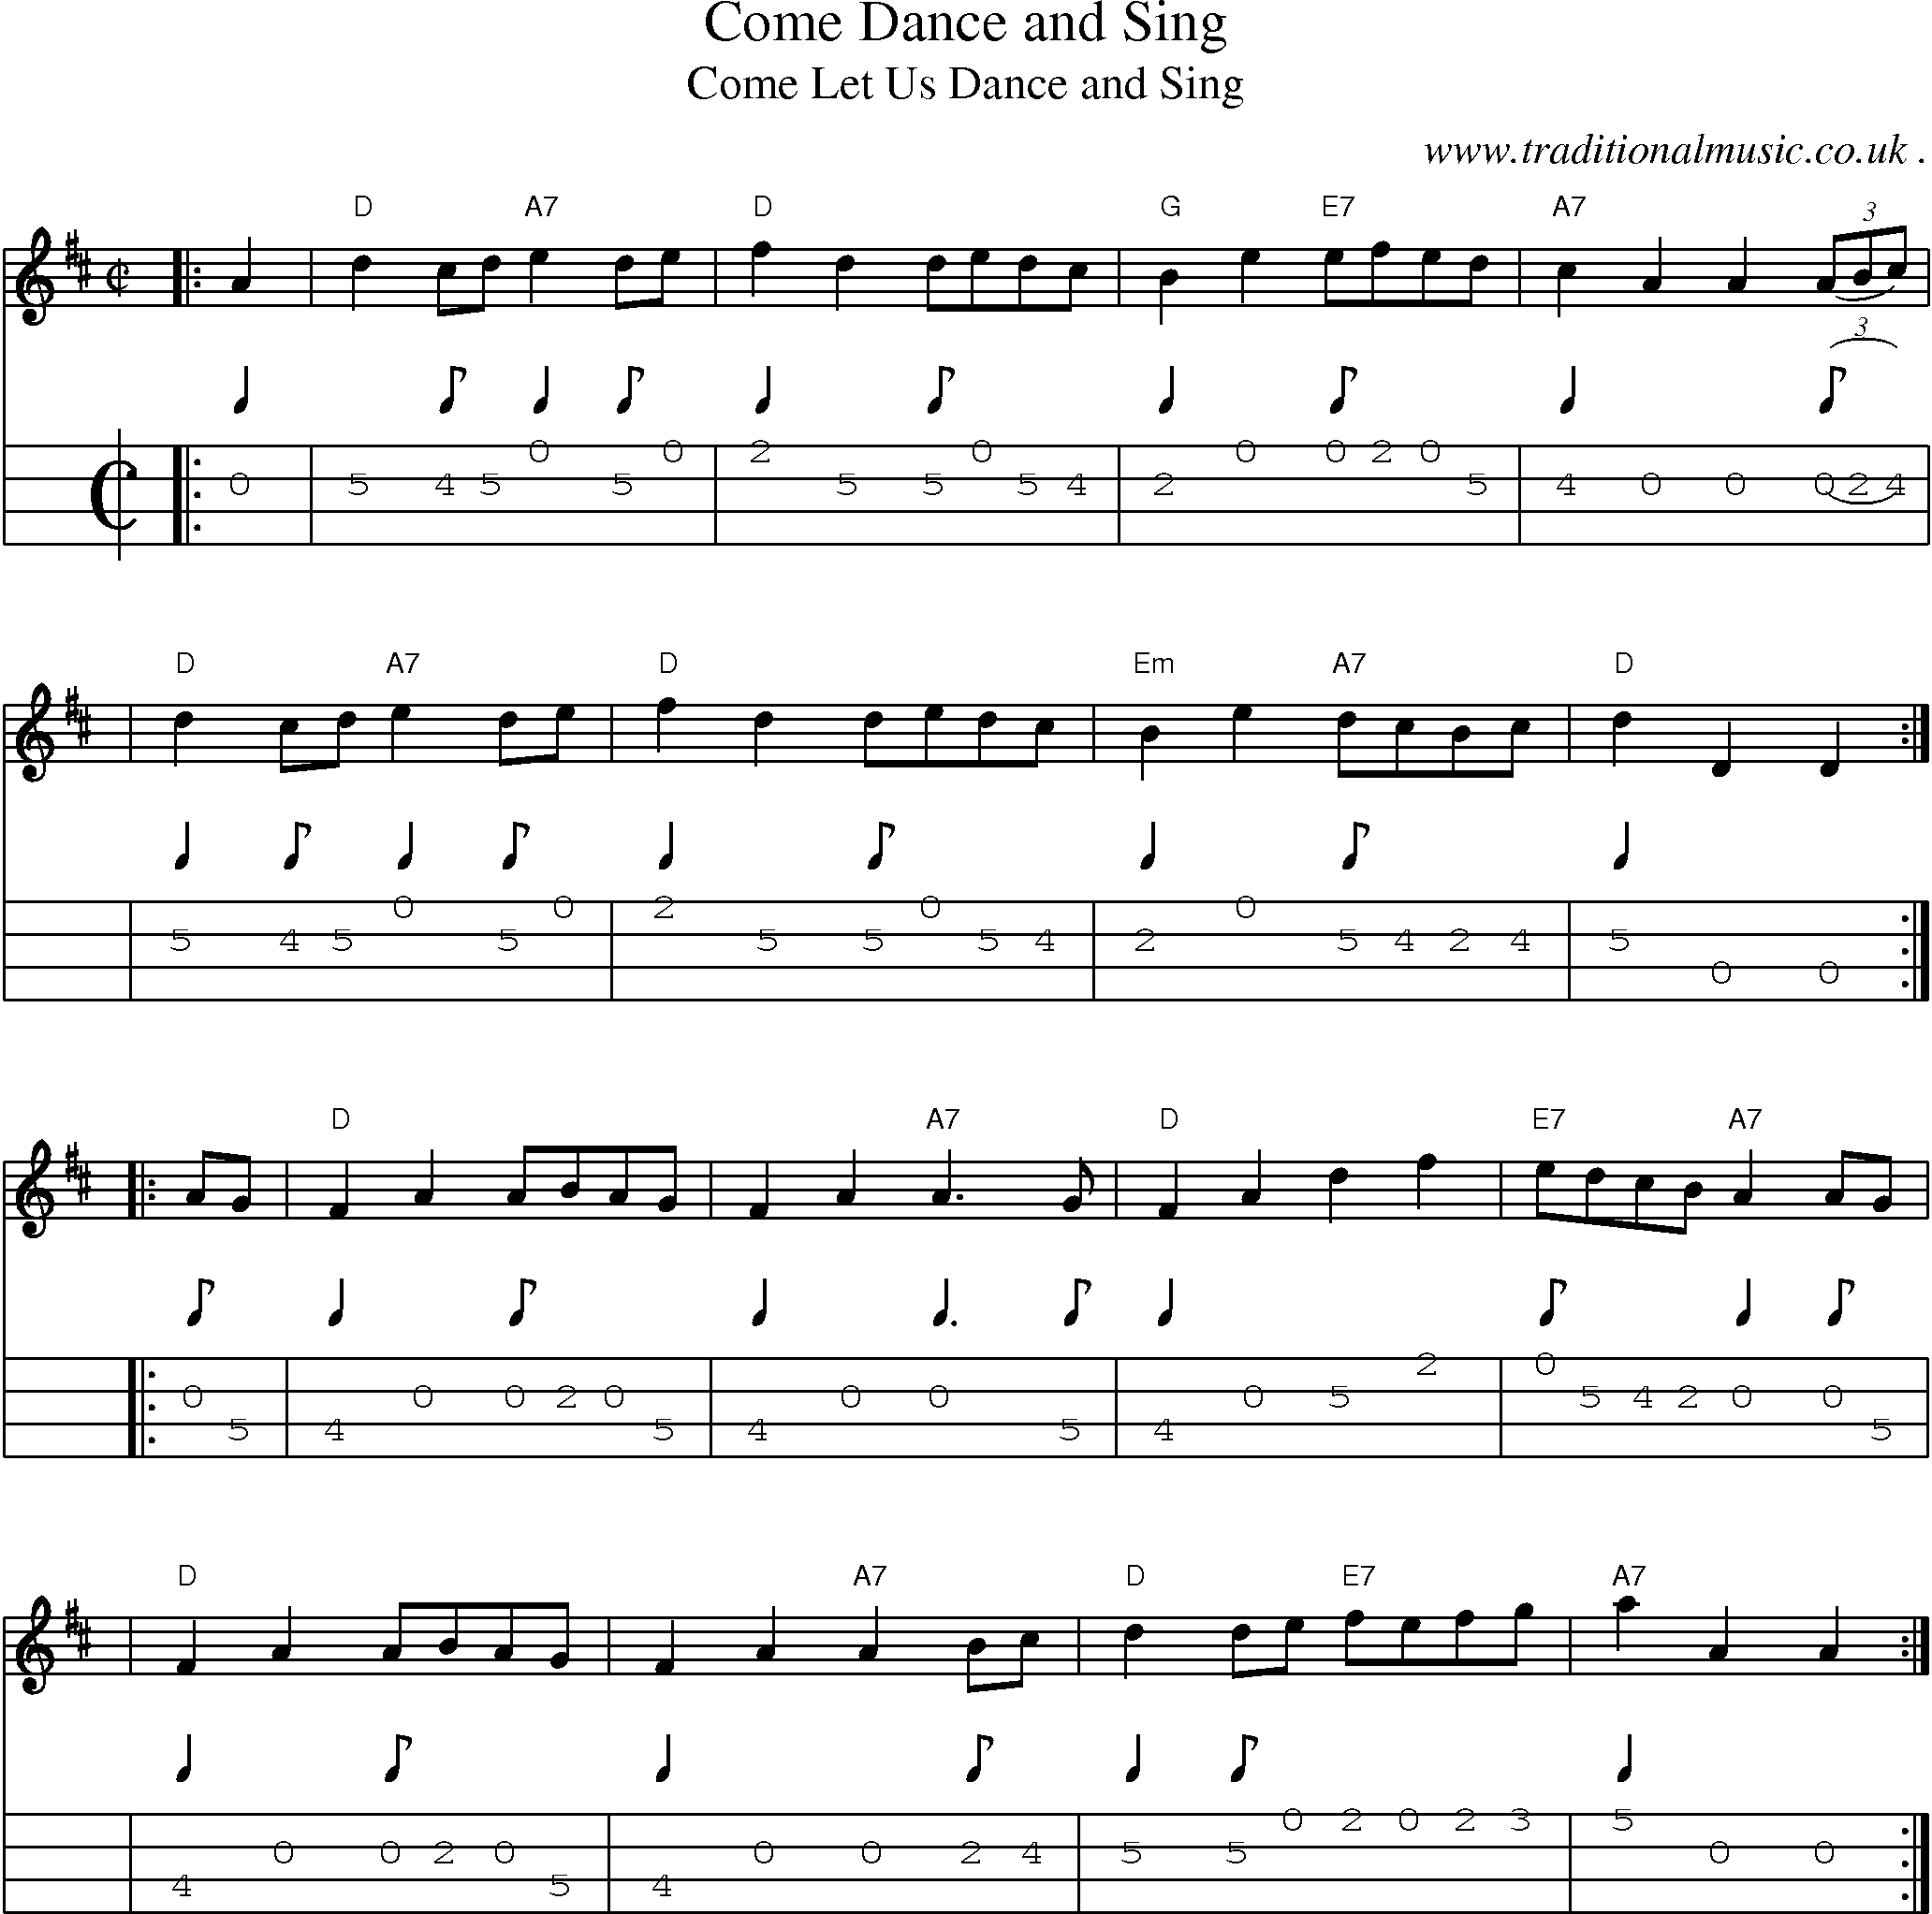 Sheet-music  score, Chords and Mandolin Tabs for Come Dance And Sing